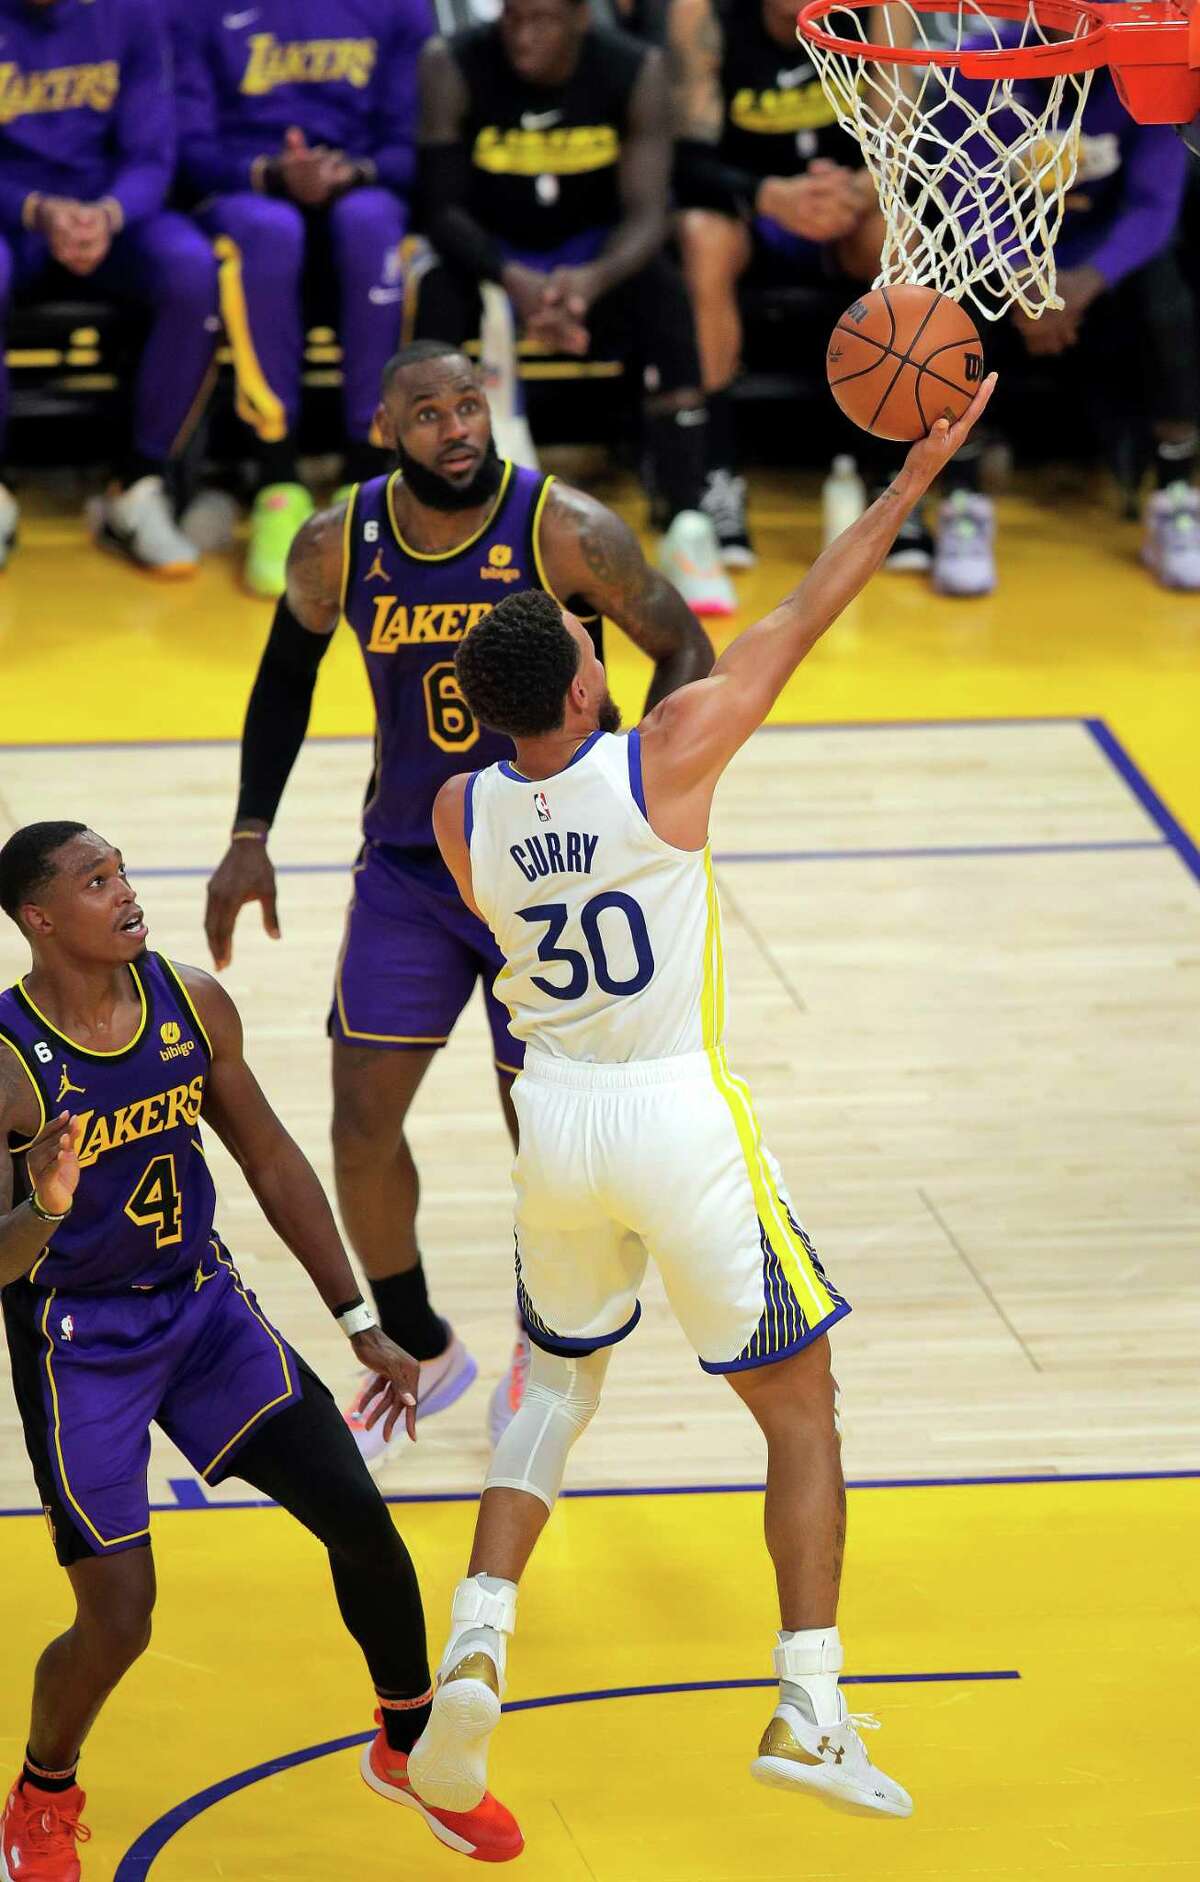 LeBron James vs. Steph Curry dominates Lakers-Warriors series - Los Angeles  Times